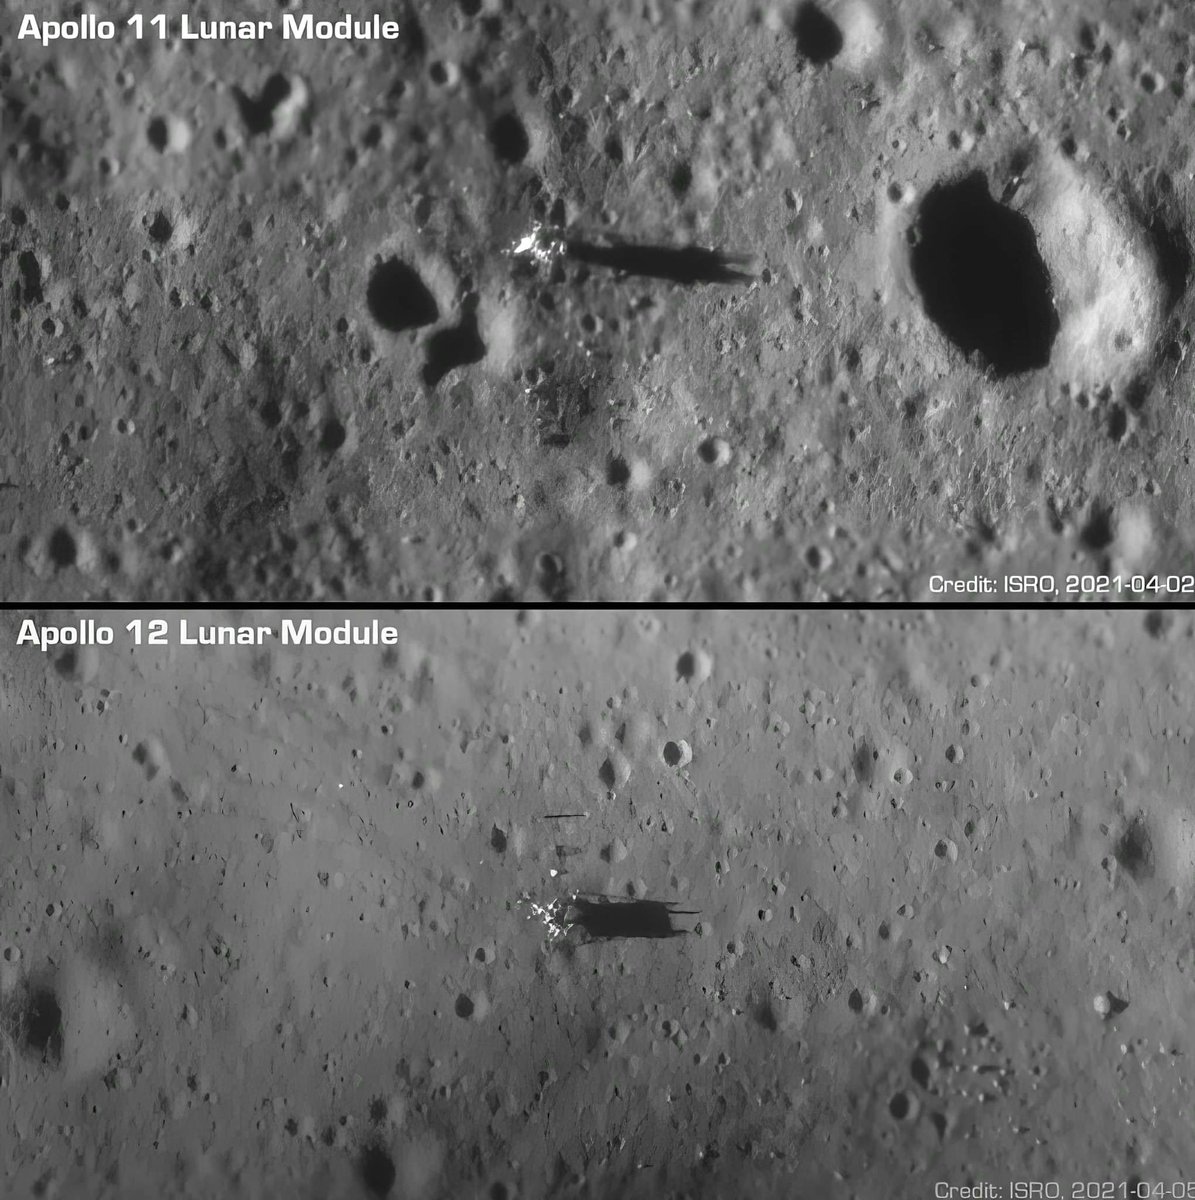 denying the moon landings is literal brainrot, especially when OTHER COUNTRIES are getting crisp images of leftover Apollo hardware from their own lunar probes. they have all the incentive to prove us as liars, and yet… 📸: India's Chandrayaan 2 orbiter